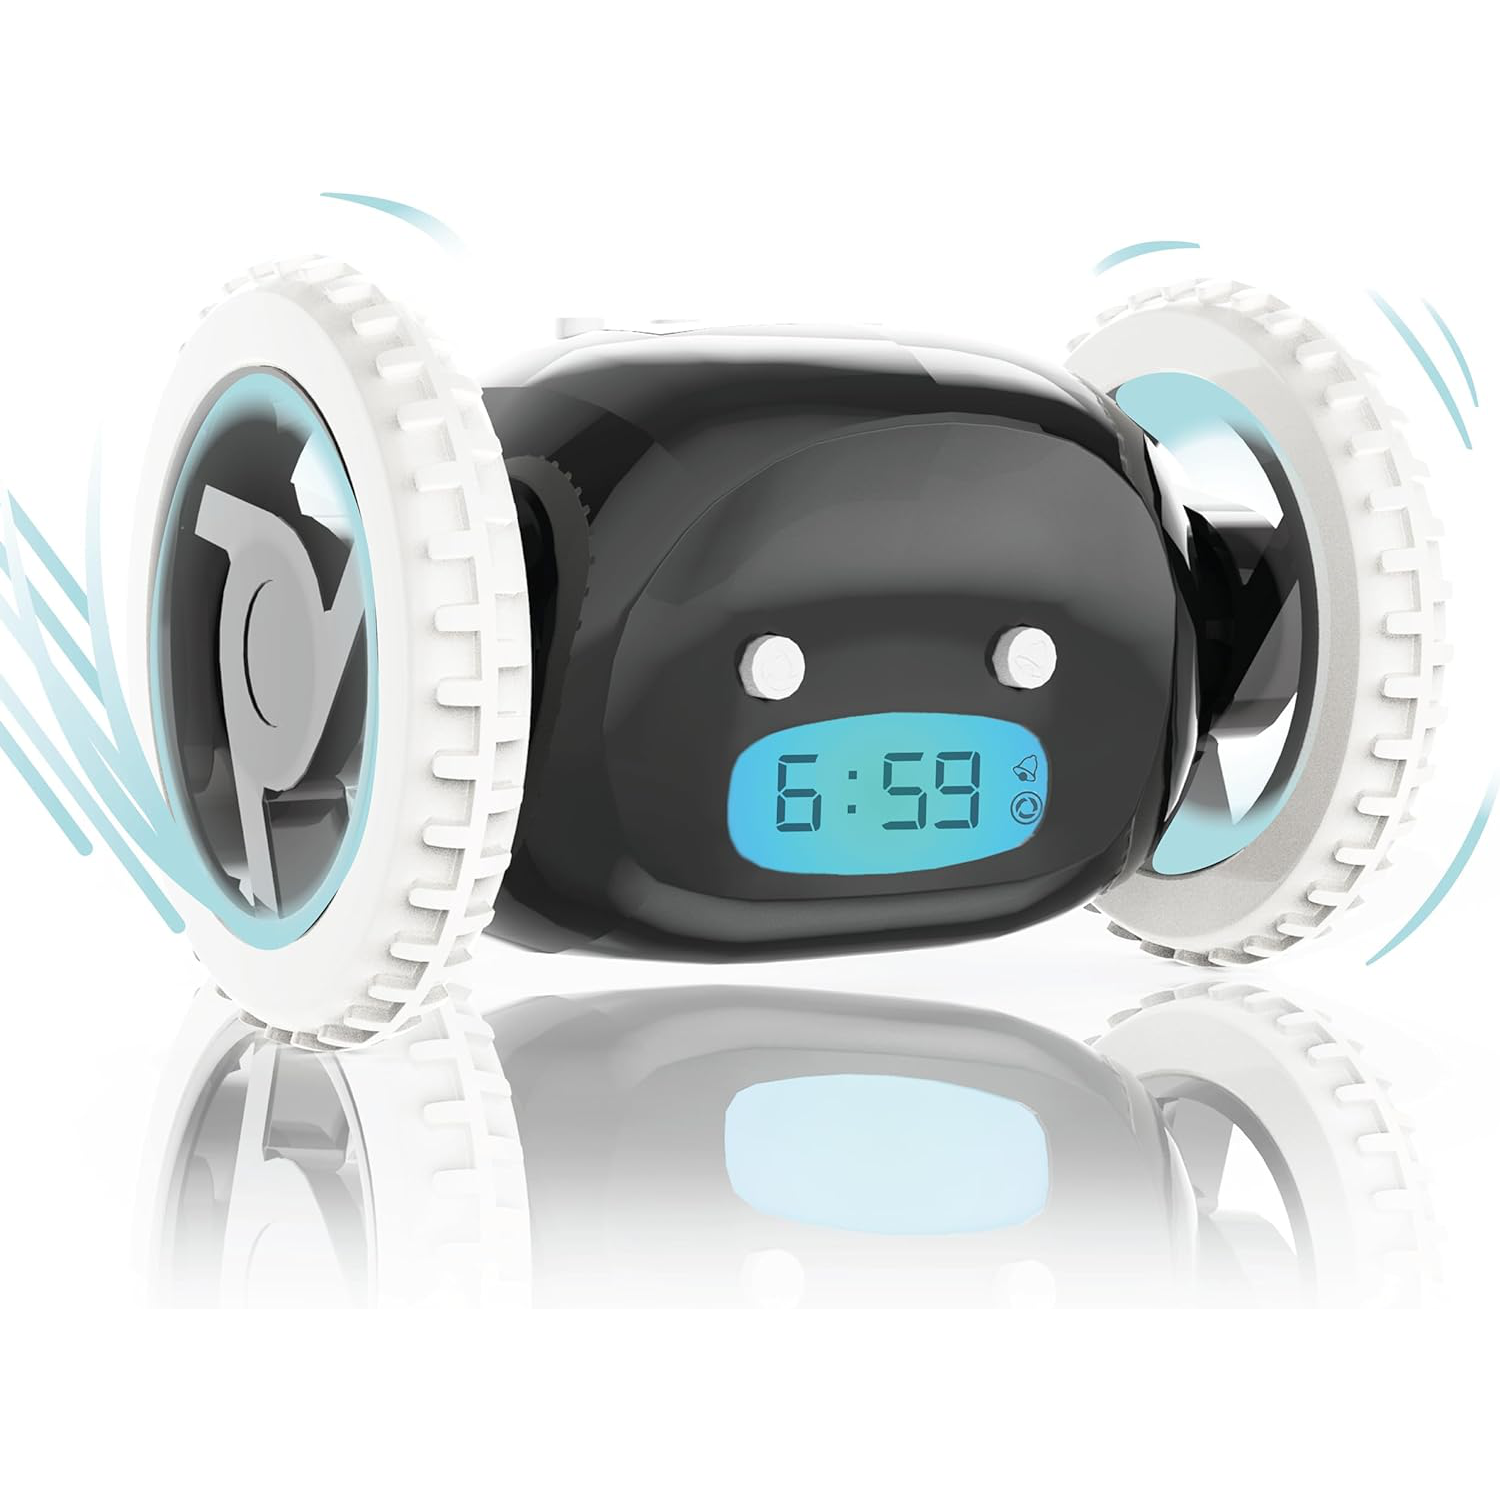 Android Giveaway of the Day - Fishing Alarm Clock